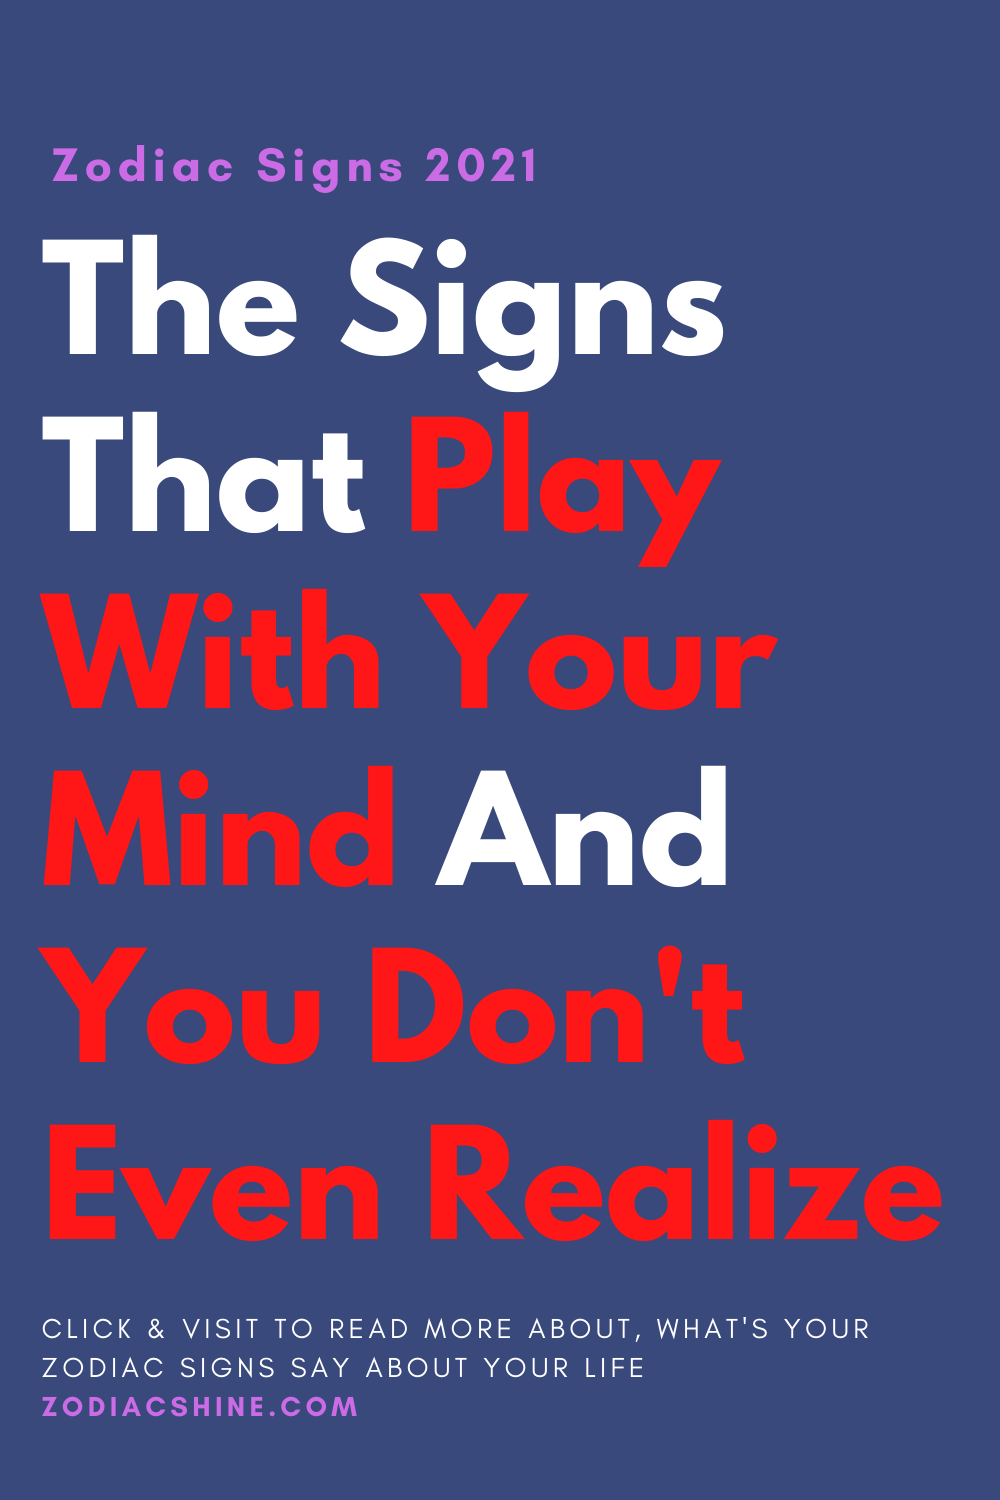 The Signs That Play With Your Mind And You Don't Even Realize